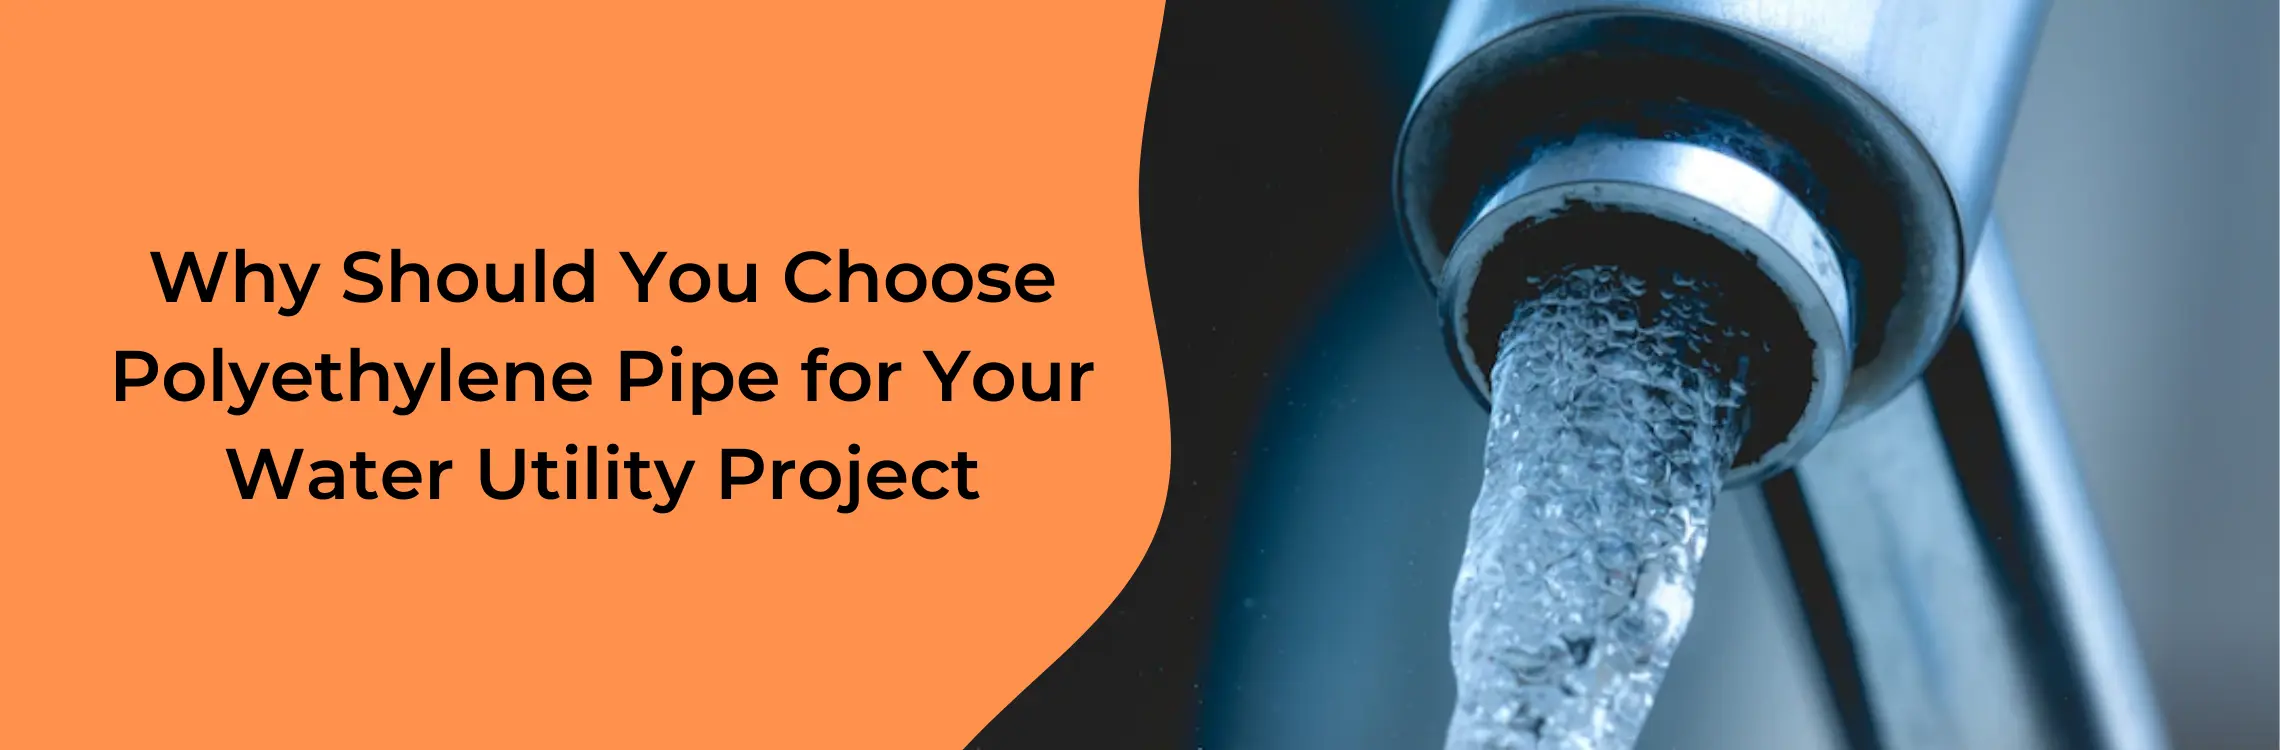 why-should-you-choose-polyethylene-pipe-for-your-water-utility-project